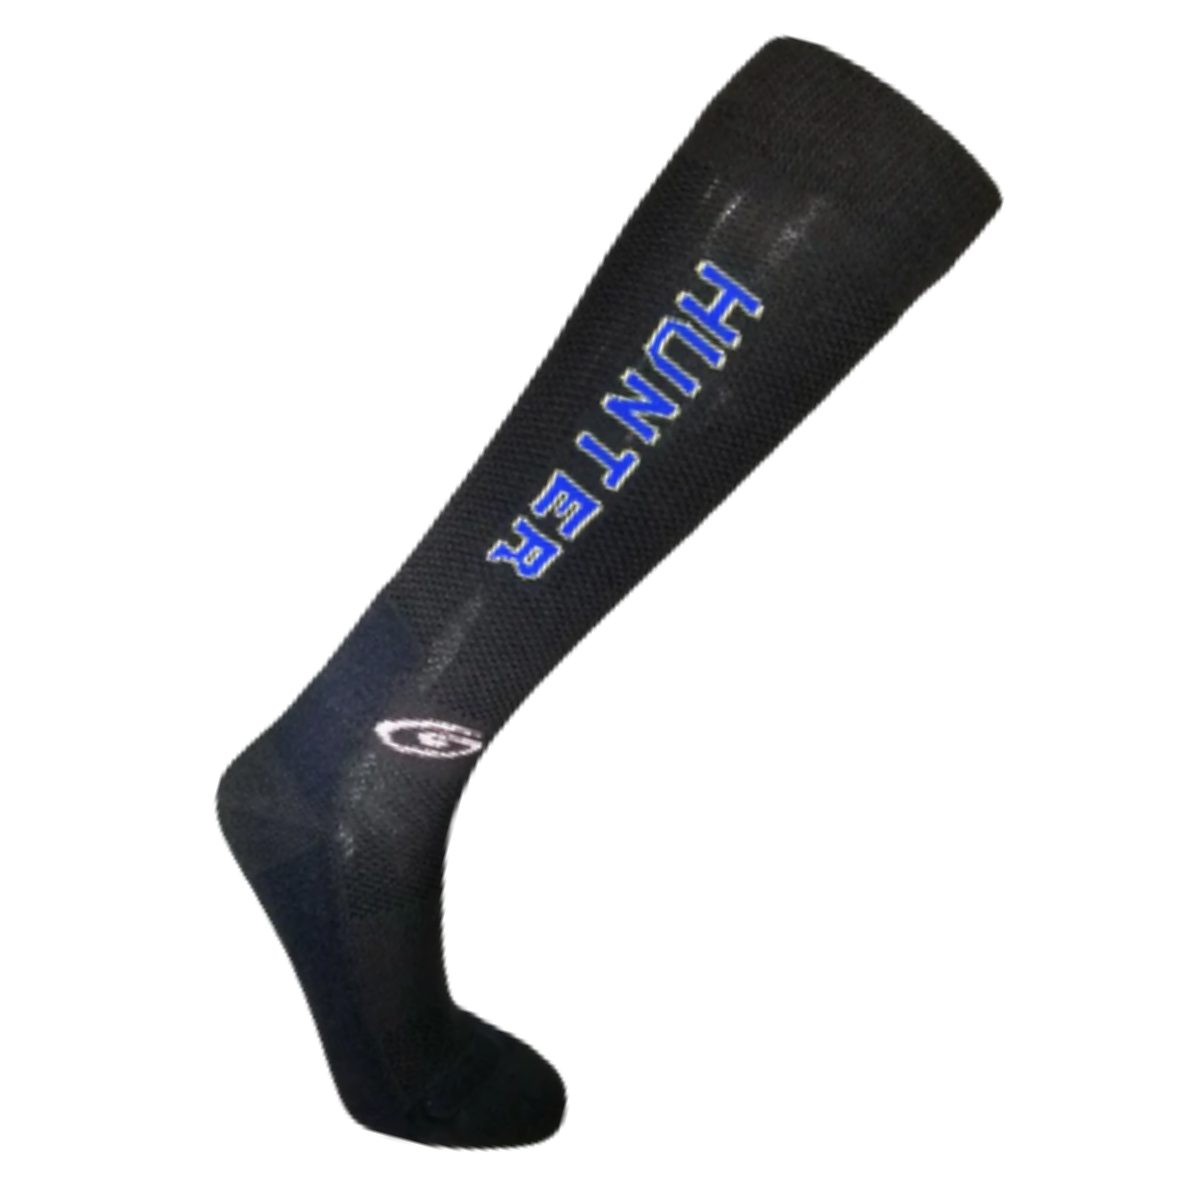 Foot Huggies &quot;Made for Riders&quot; HUNTER Socks in Black/Blue